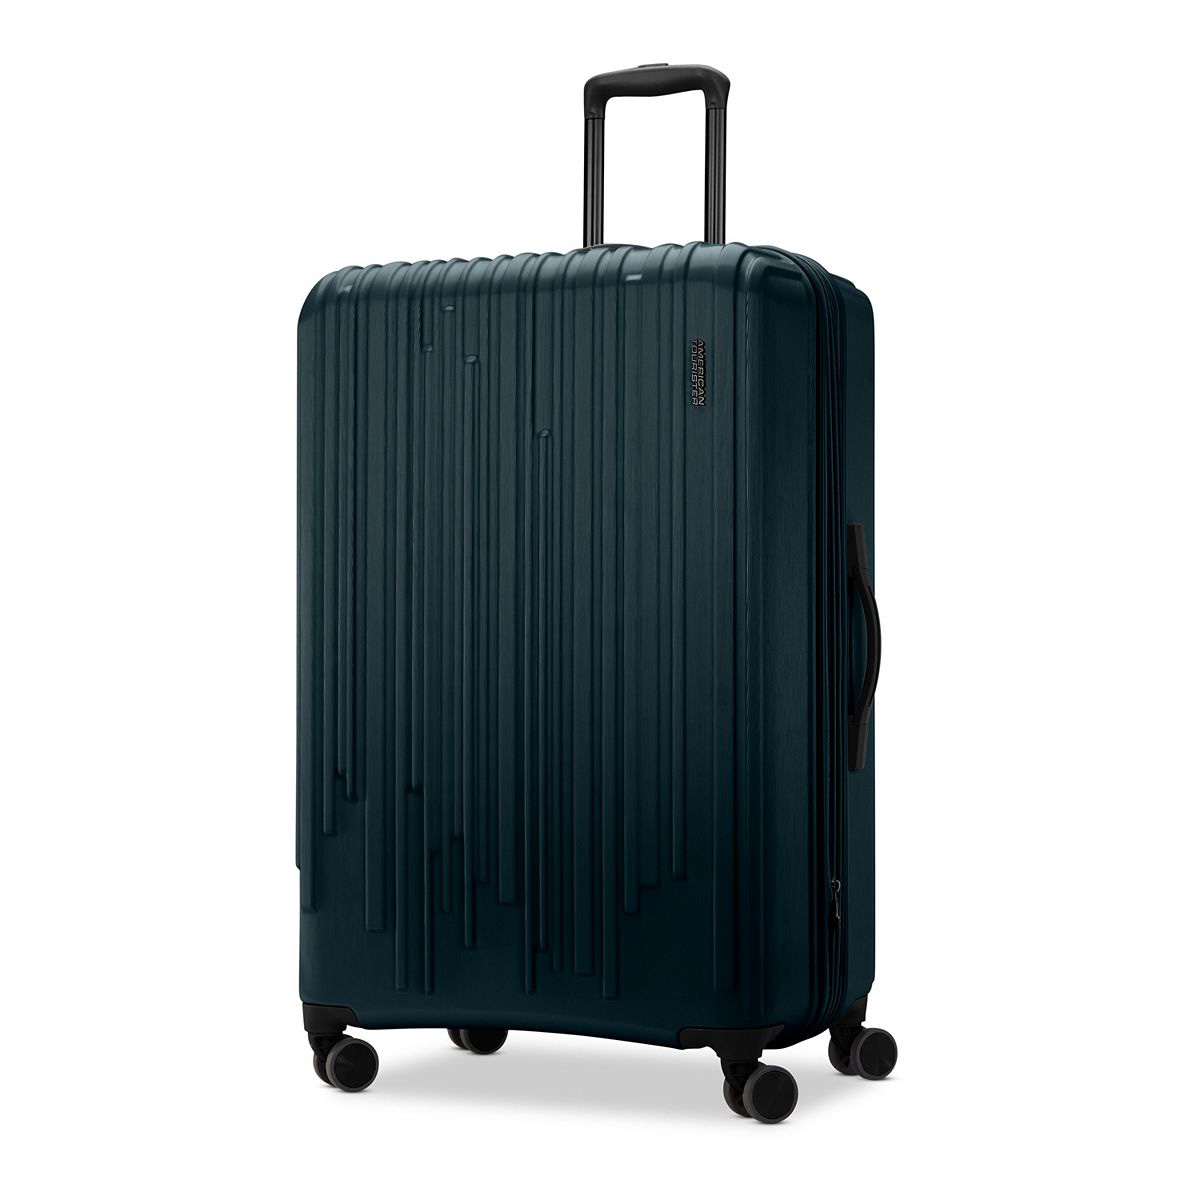 American Tourister hardshell suitcase in black 